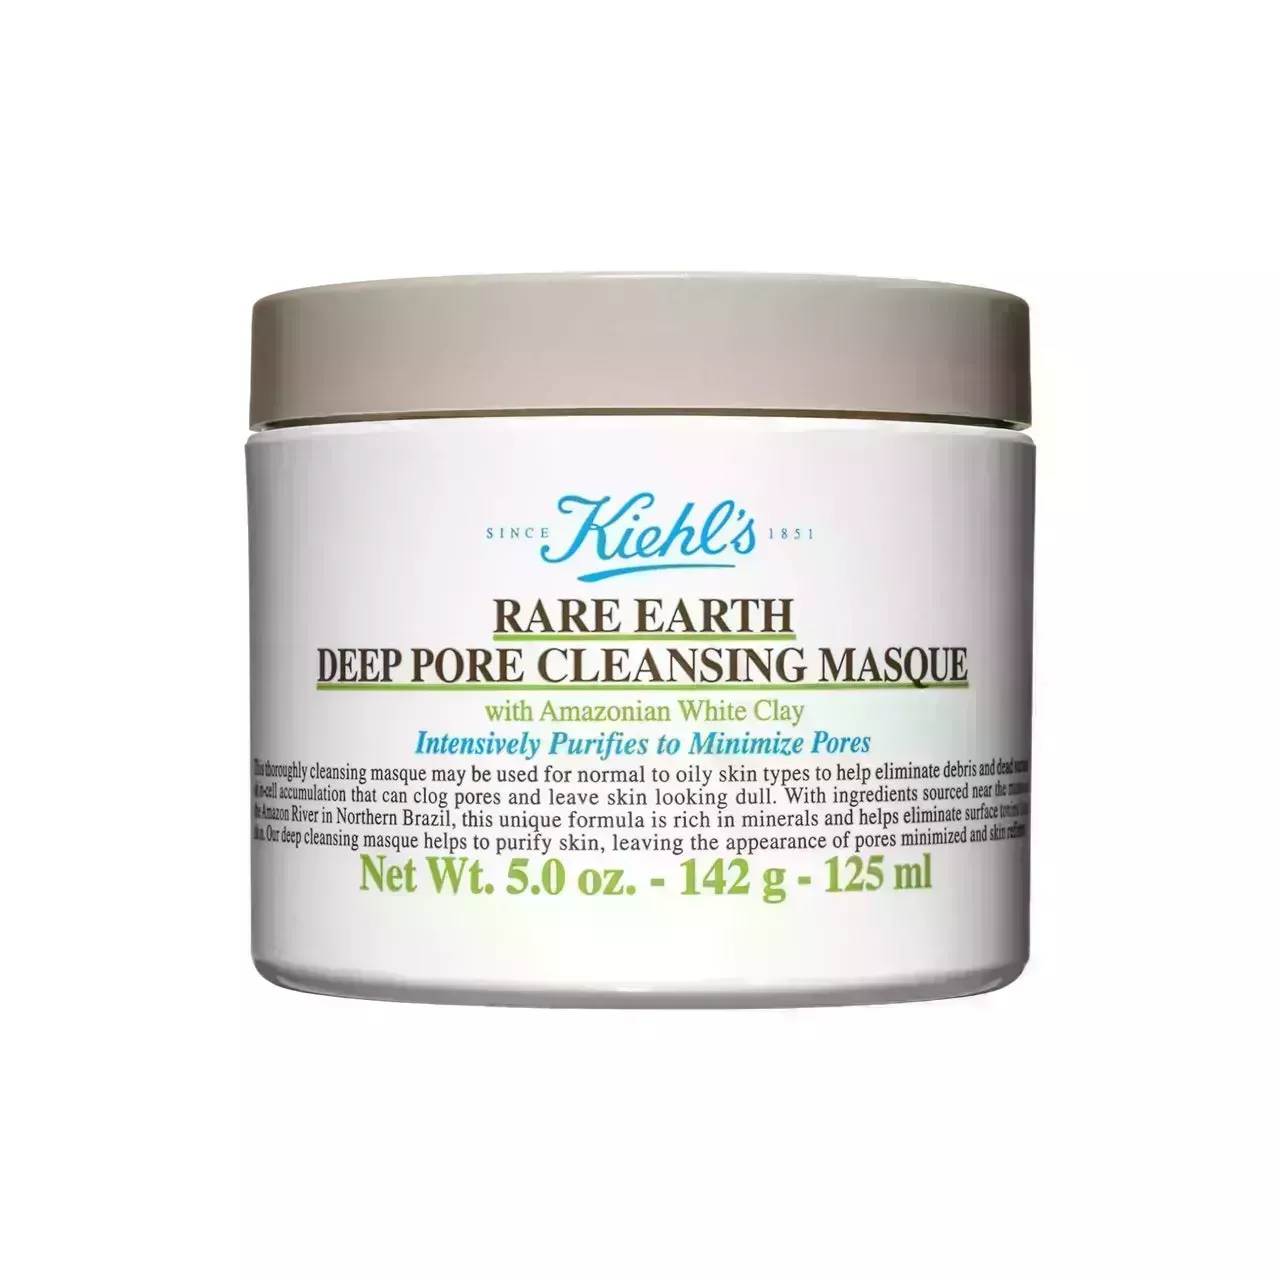 Kiehl's Rare Earth Deep Pore Cleansing Masque on white background